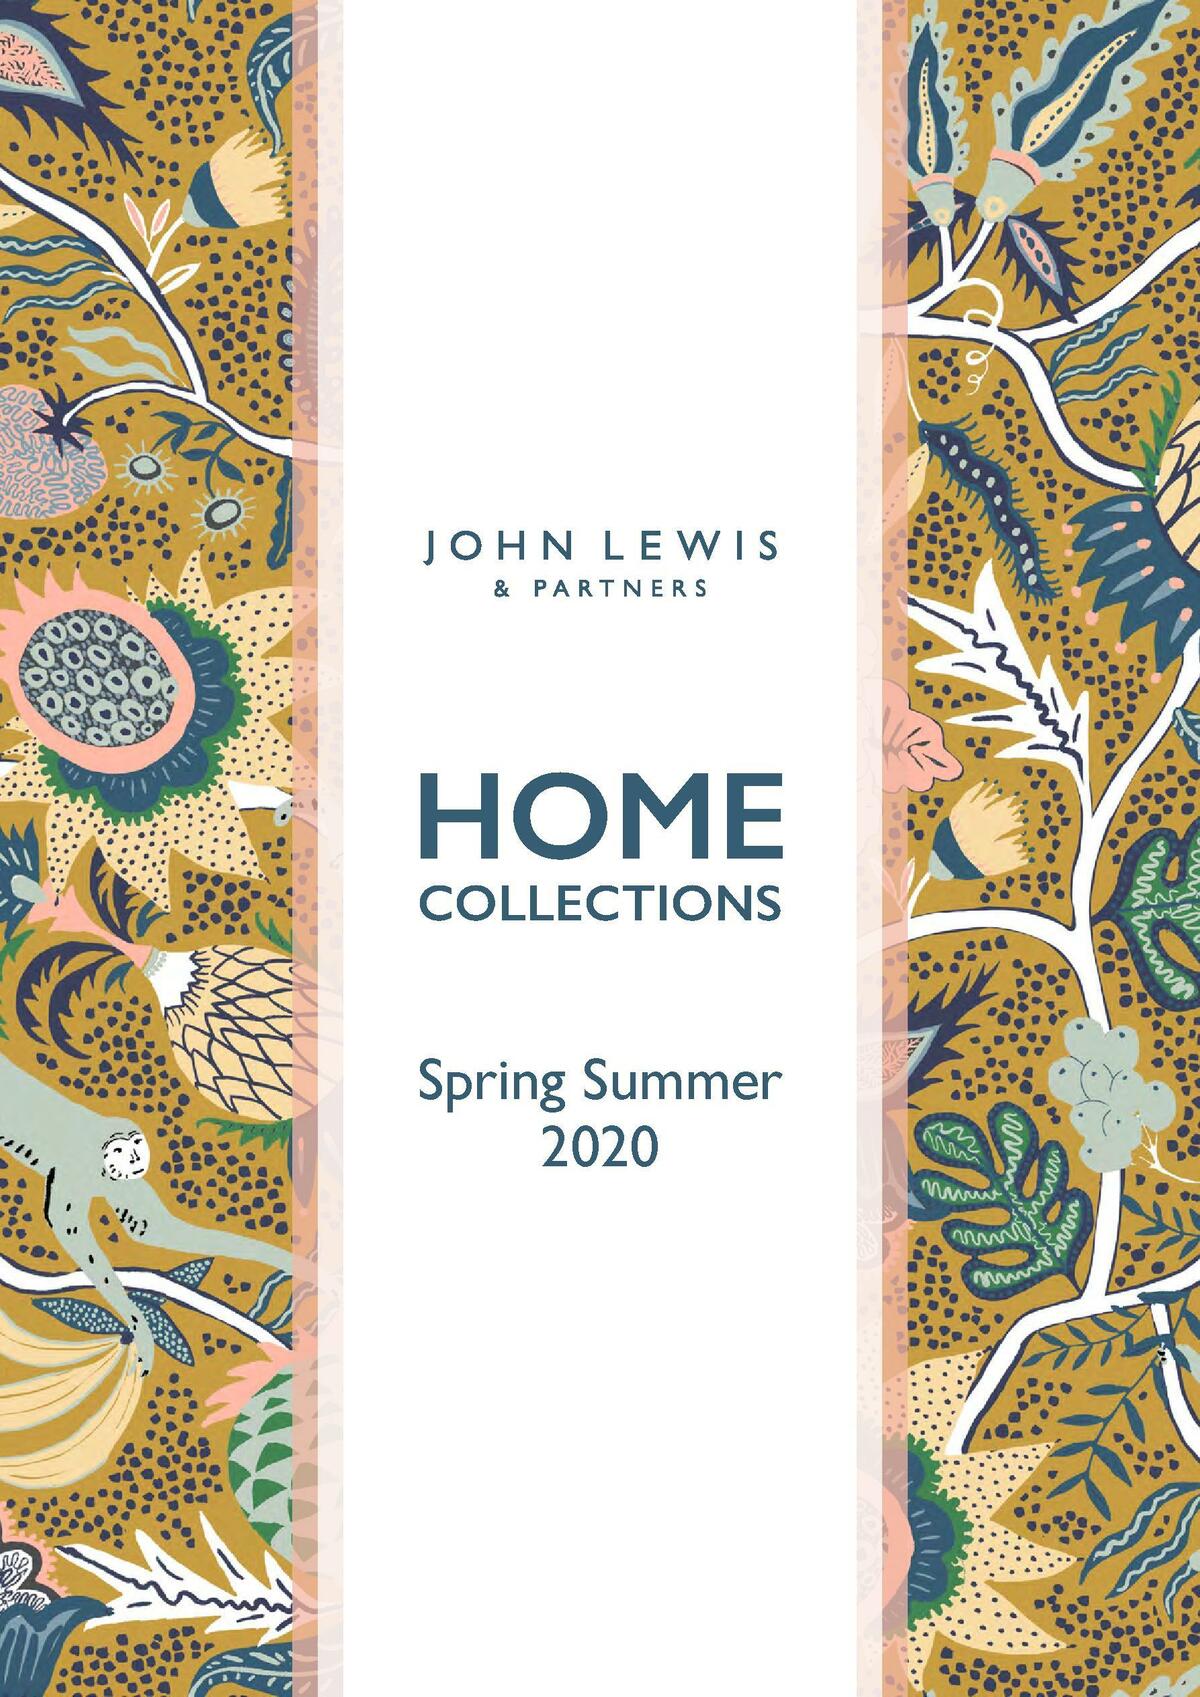 John Lewis Home Spring Summer 2020 Offers from 1 March